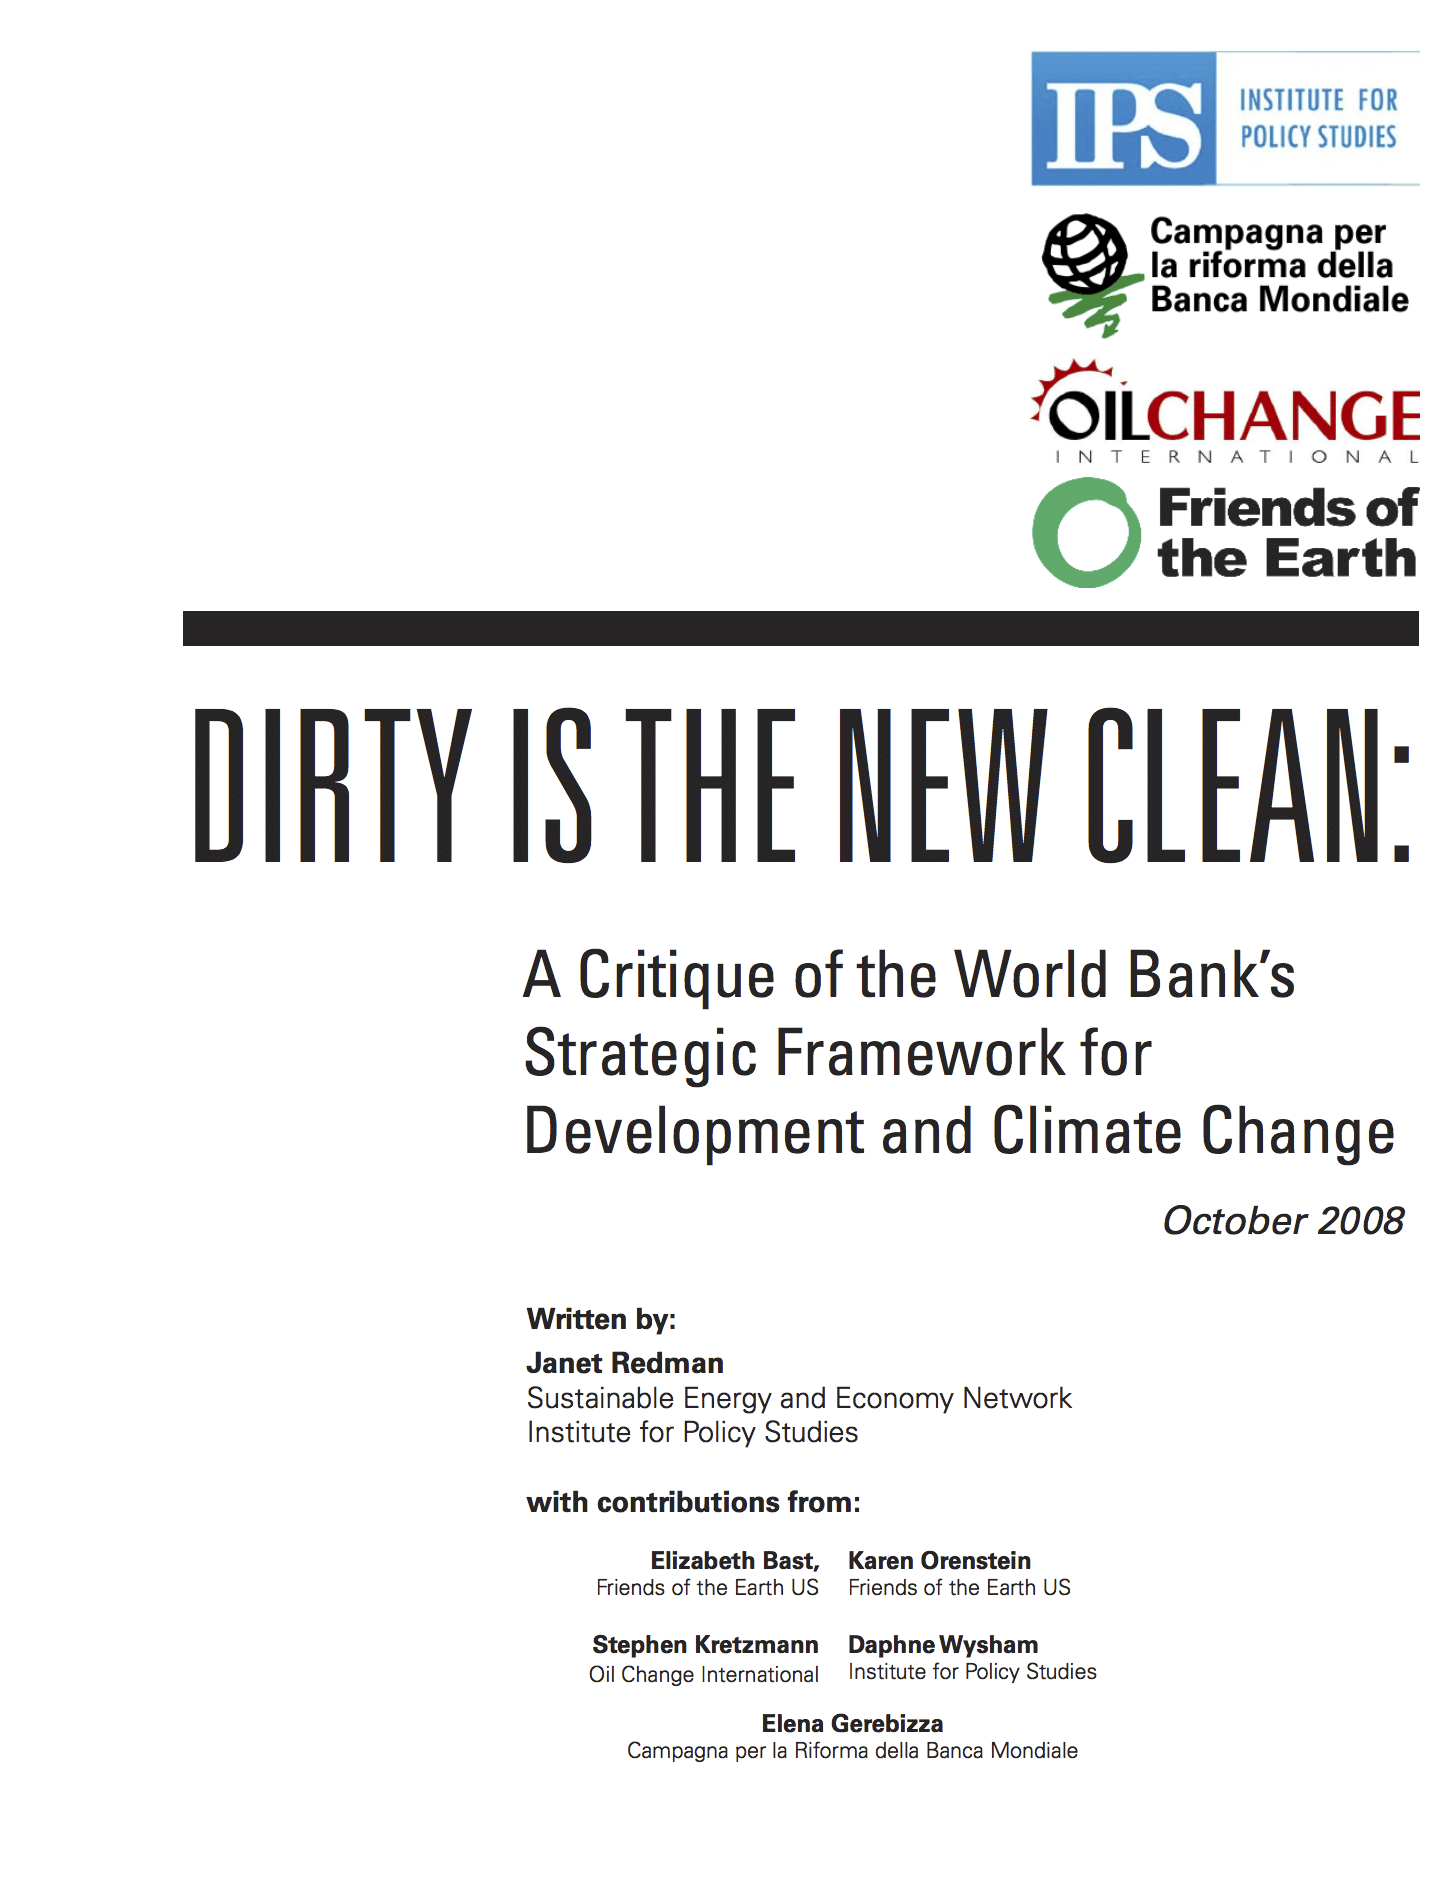 Dirty is the New Clean: A critique of the World Bank’s strategic framework for development and climate change